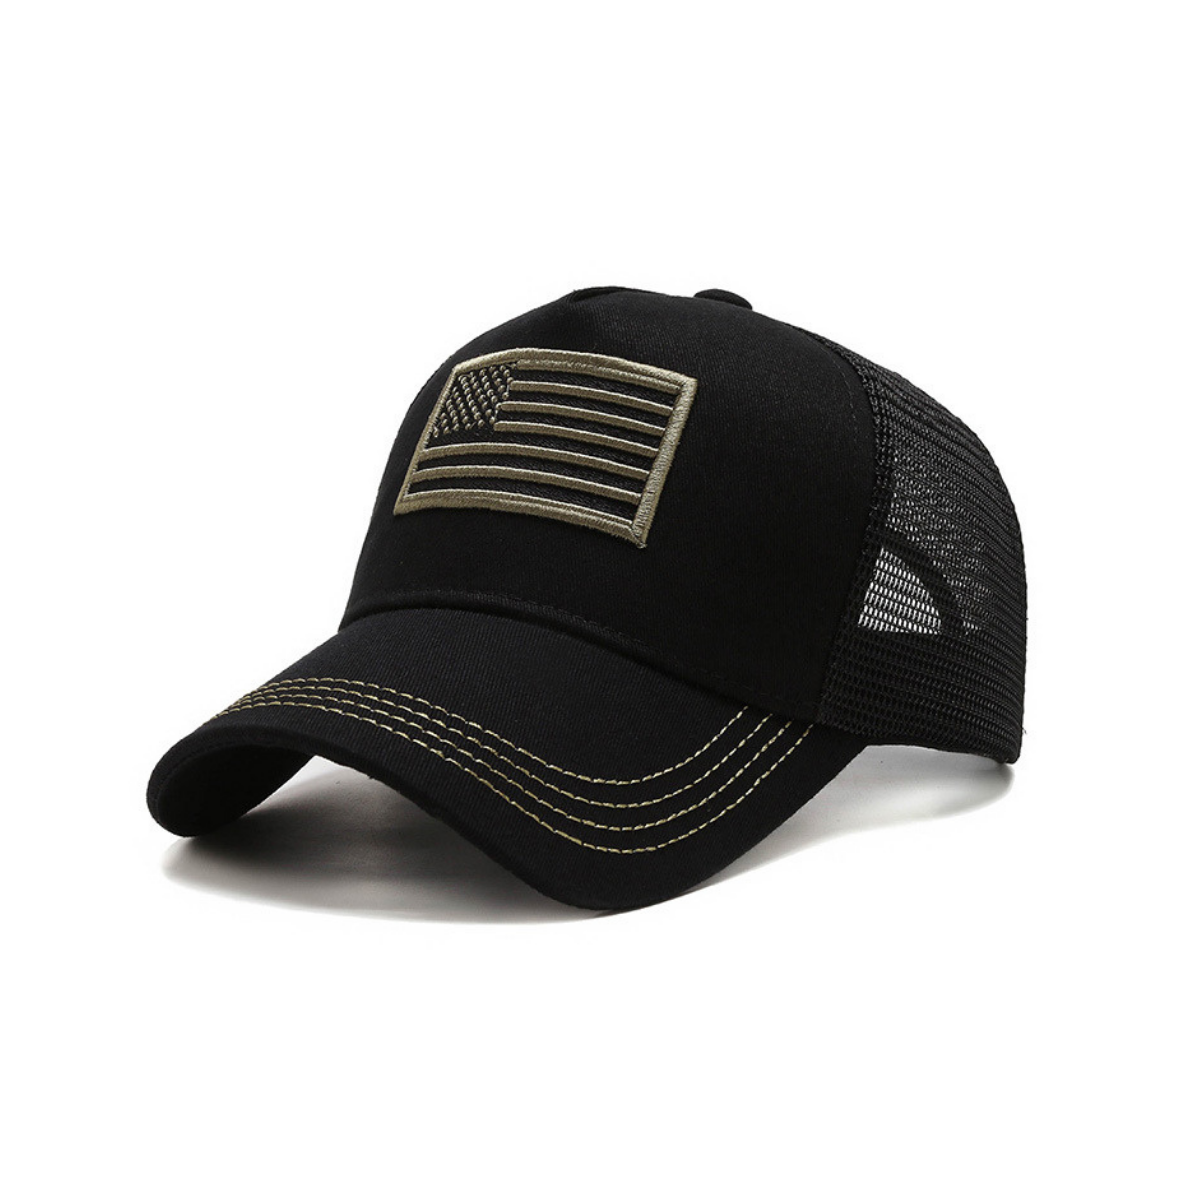 American Flag Trucker Hat with Adjustable Strap - Mercantile Mountain